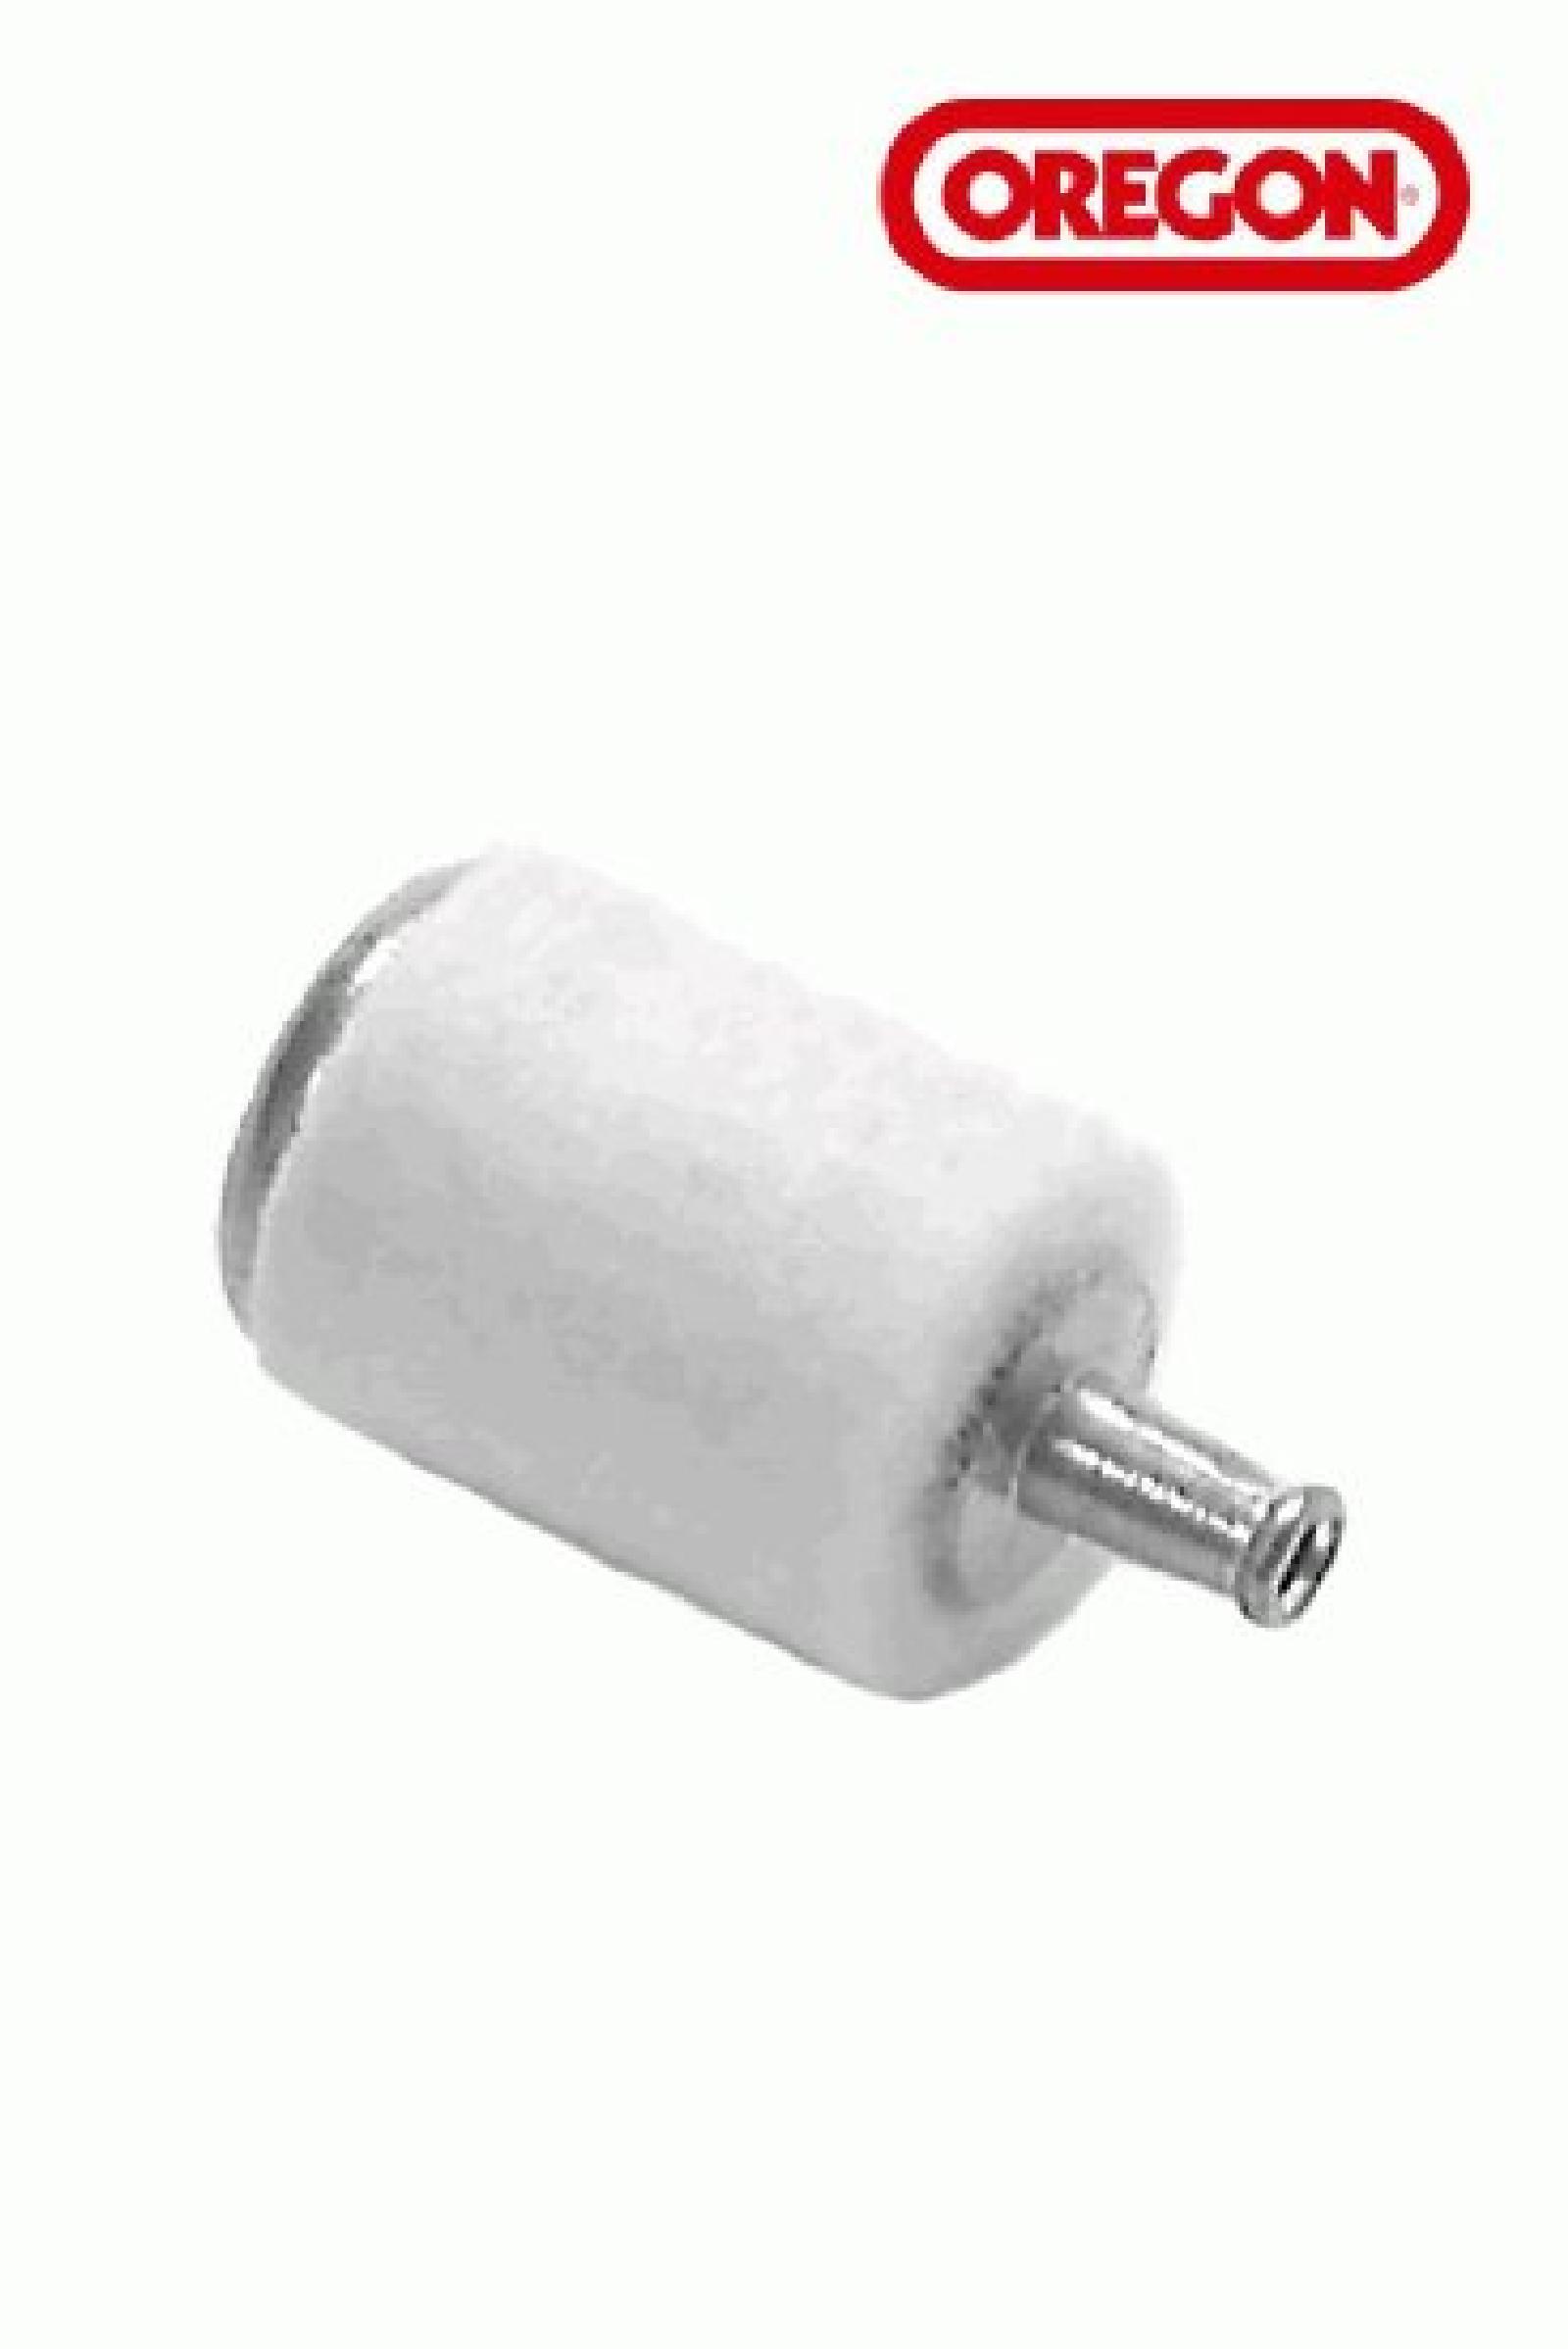 FUEL FILTER ASSY 1/8IN TI part# 07-207 by Oregon - Click Image to Close